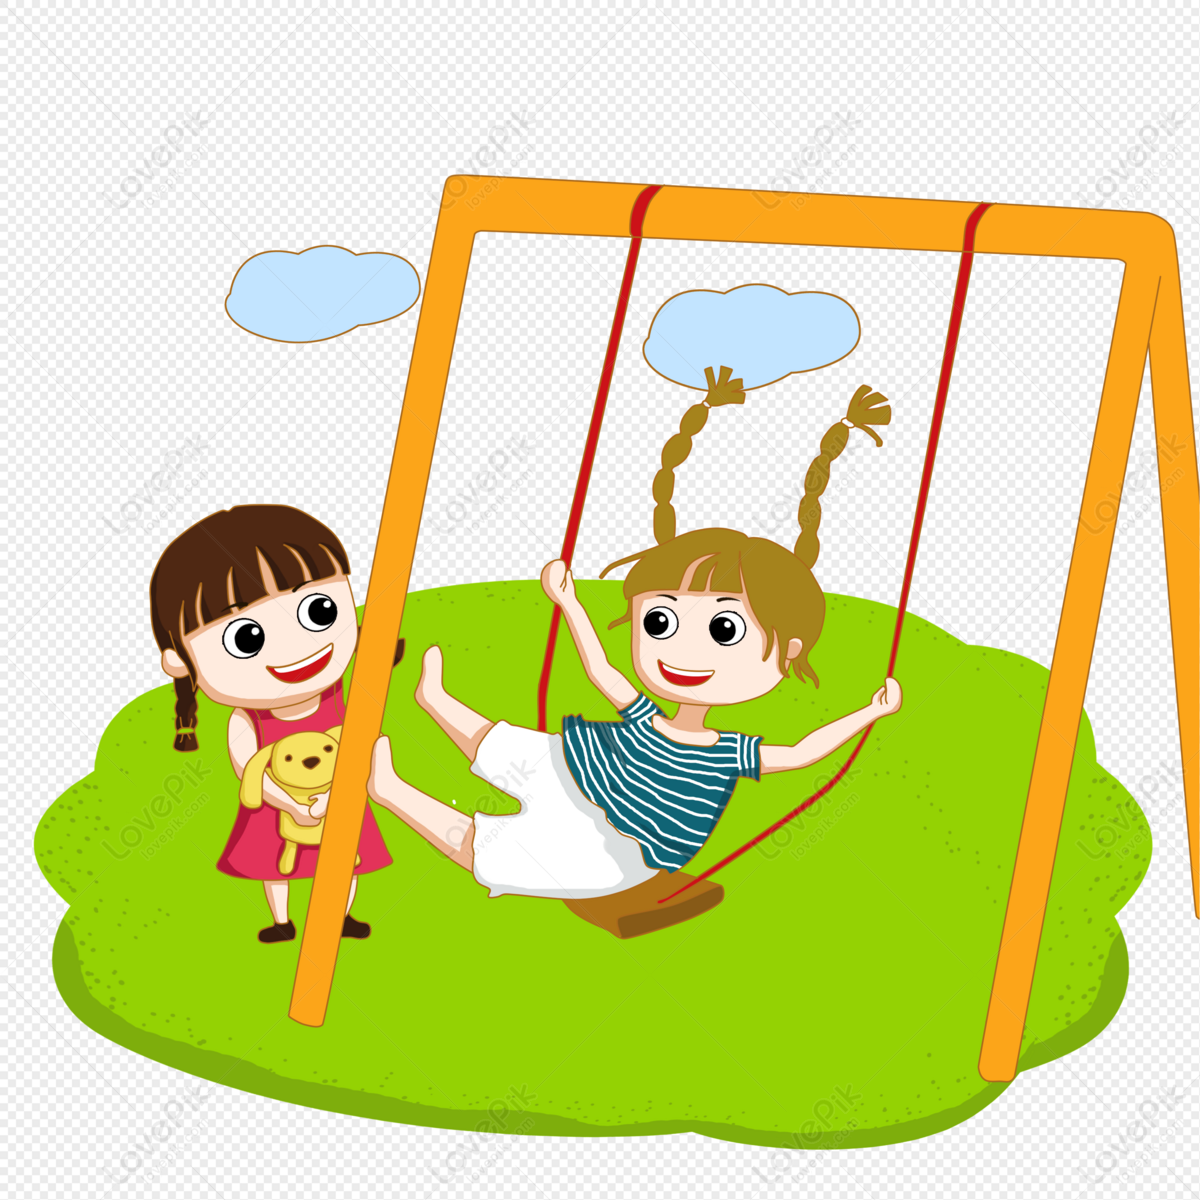 free clipart of child on swing